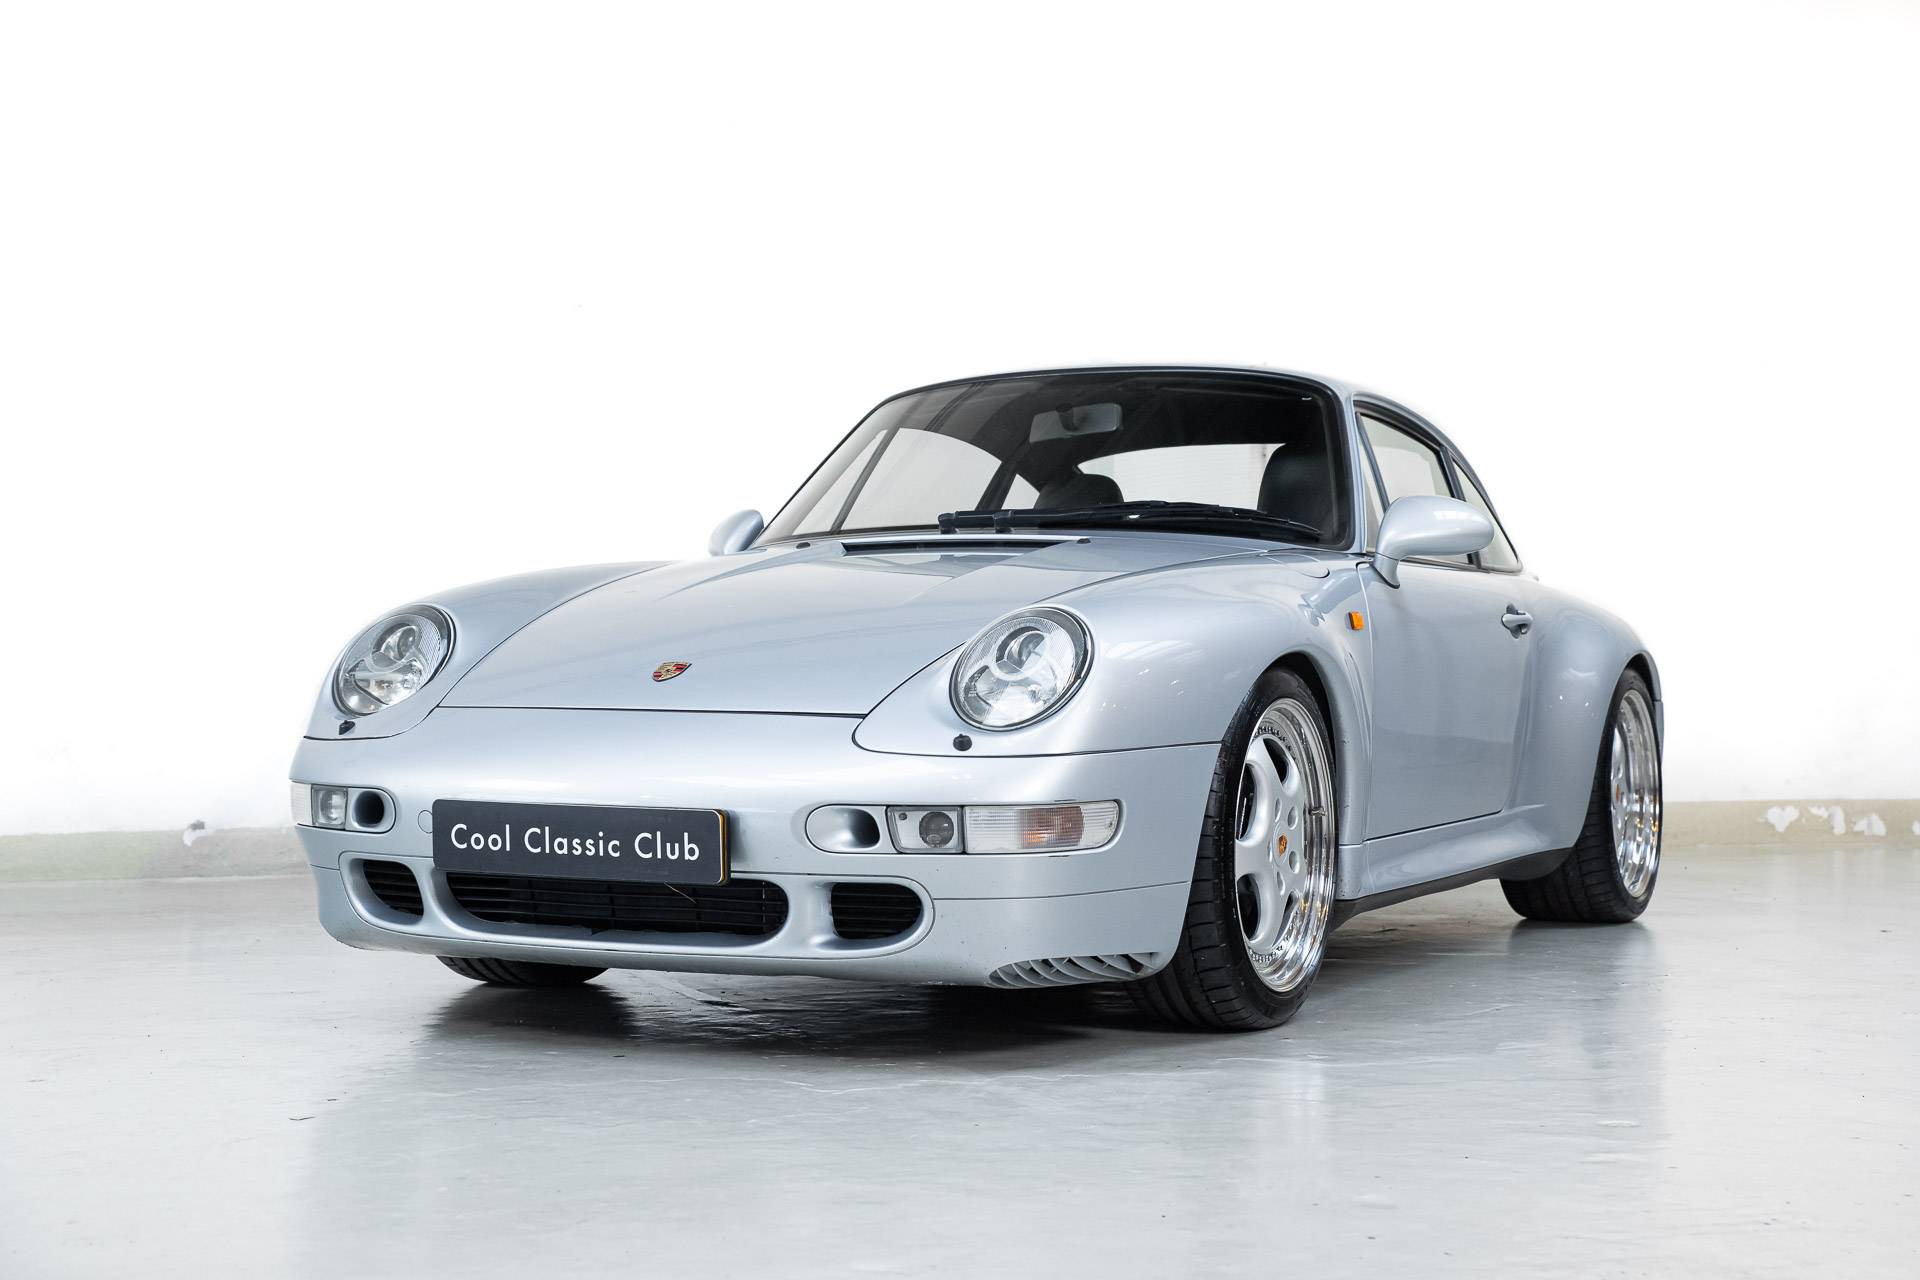 For Sale: Porsche 911 Carrera S (1998) offered for $203,900